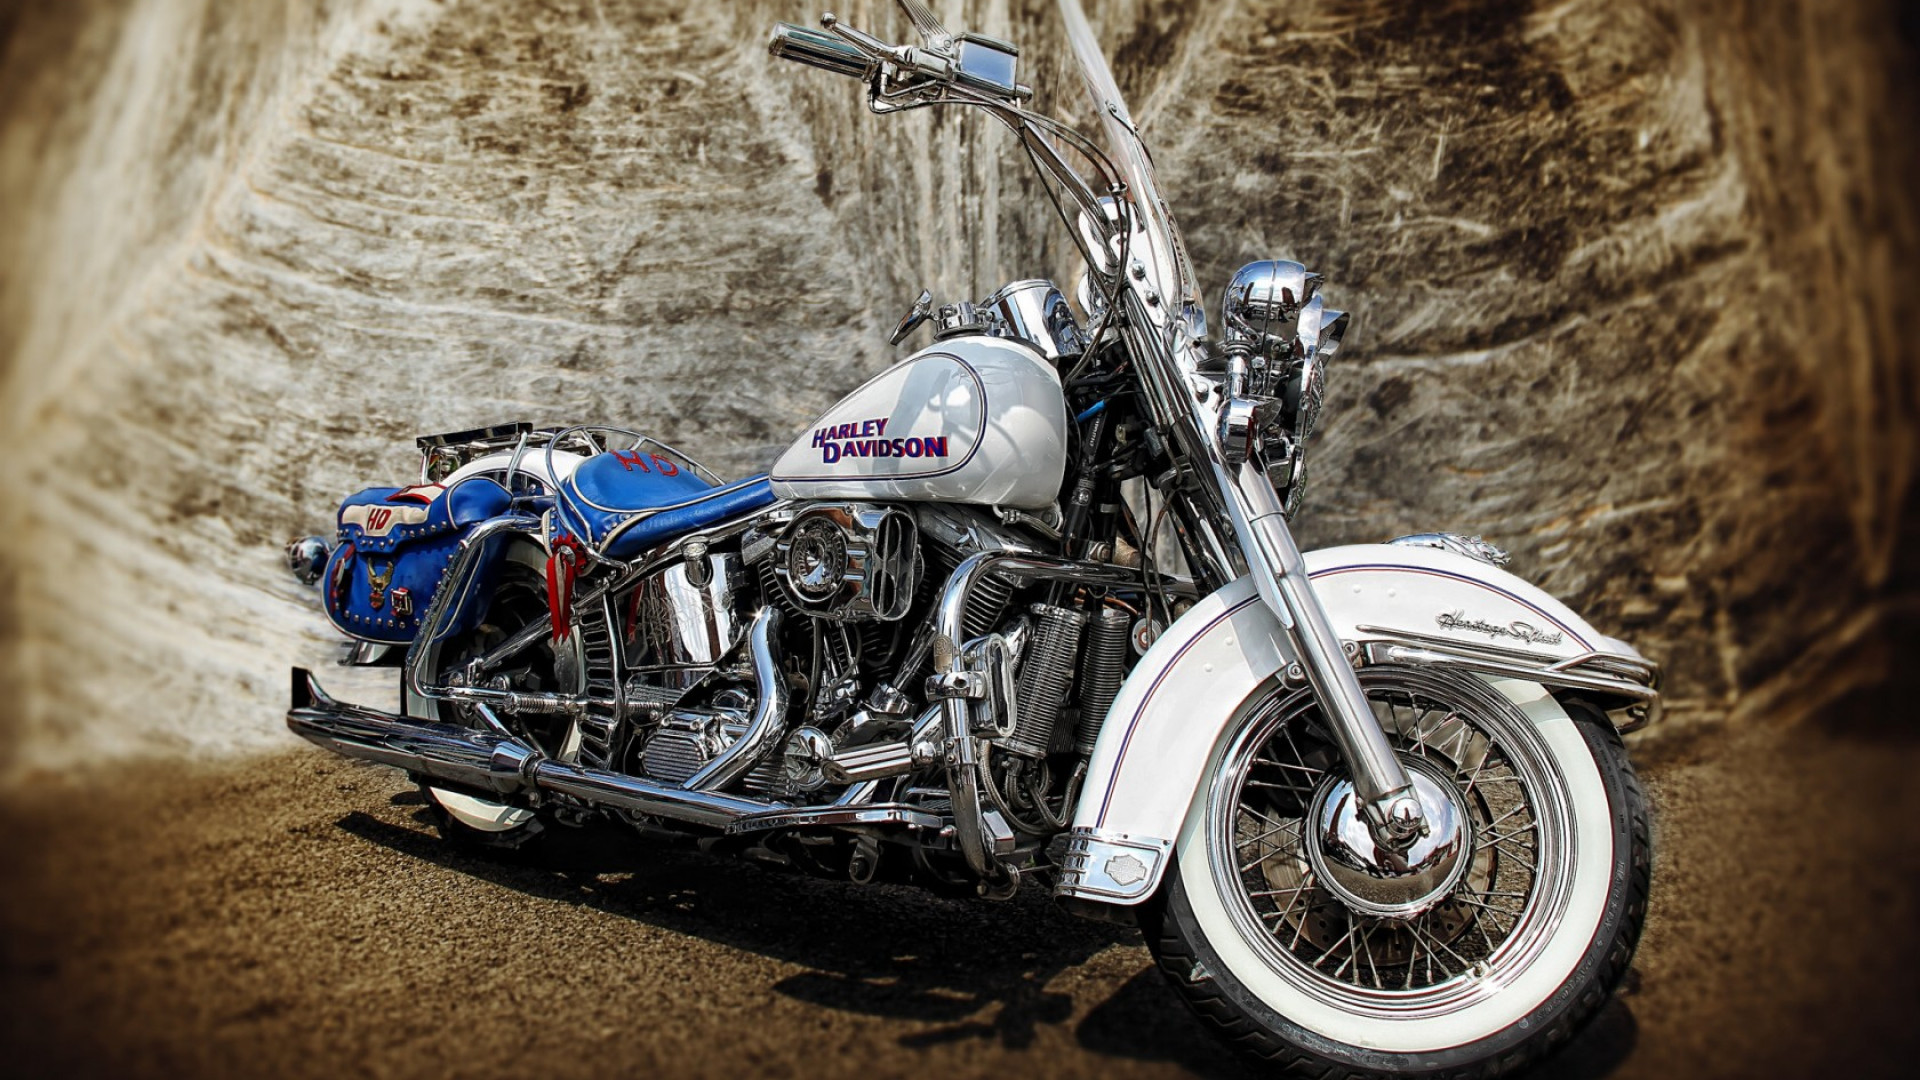 Preview Wallpaper Harley Davidson Hdr Motorcycle 1920x1080 1920x1080